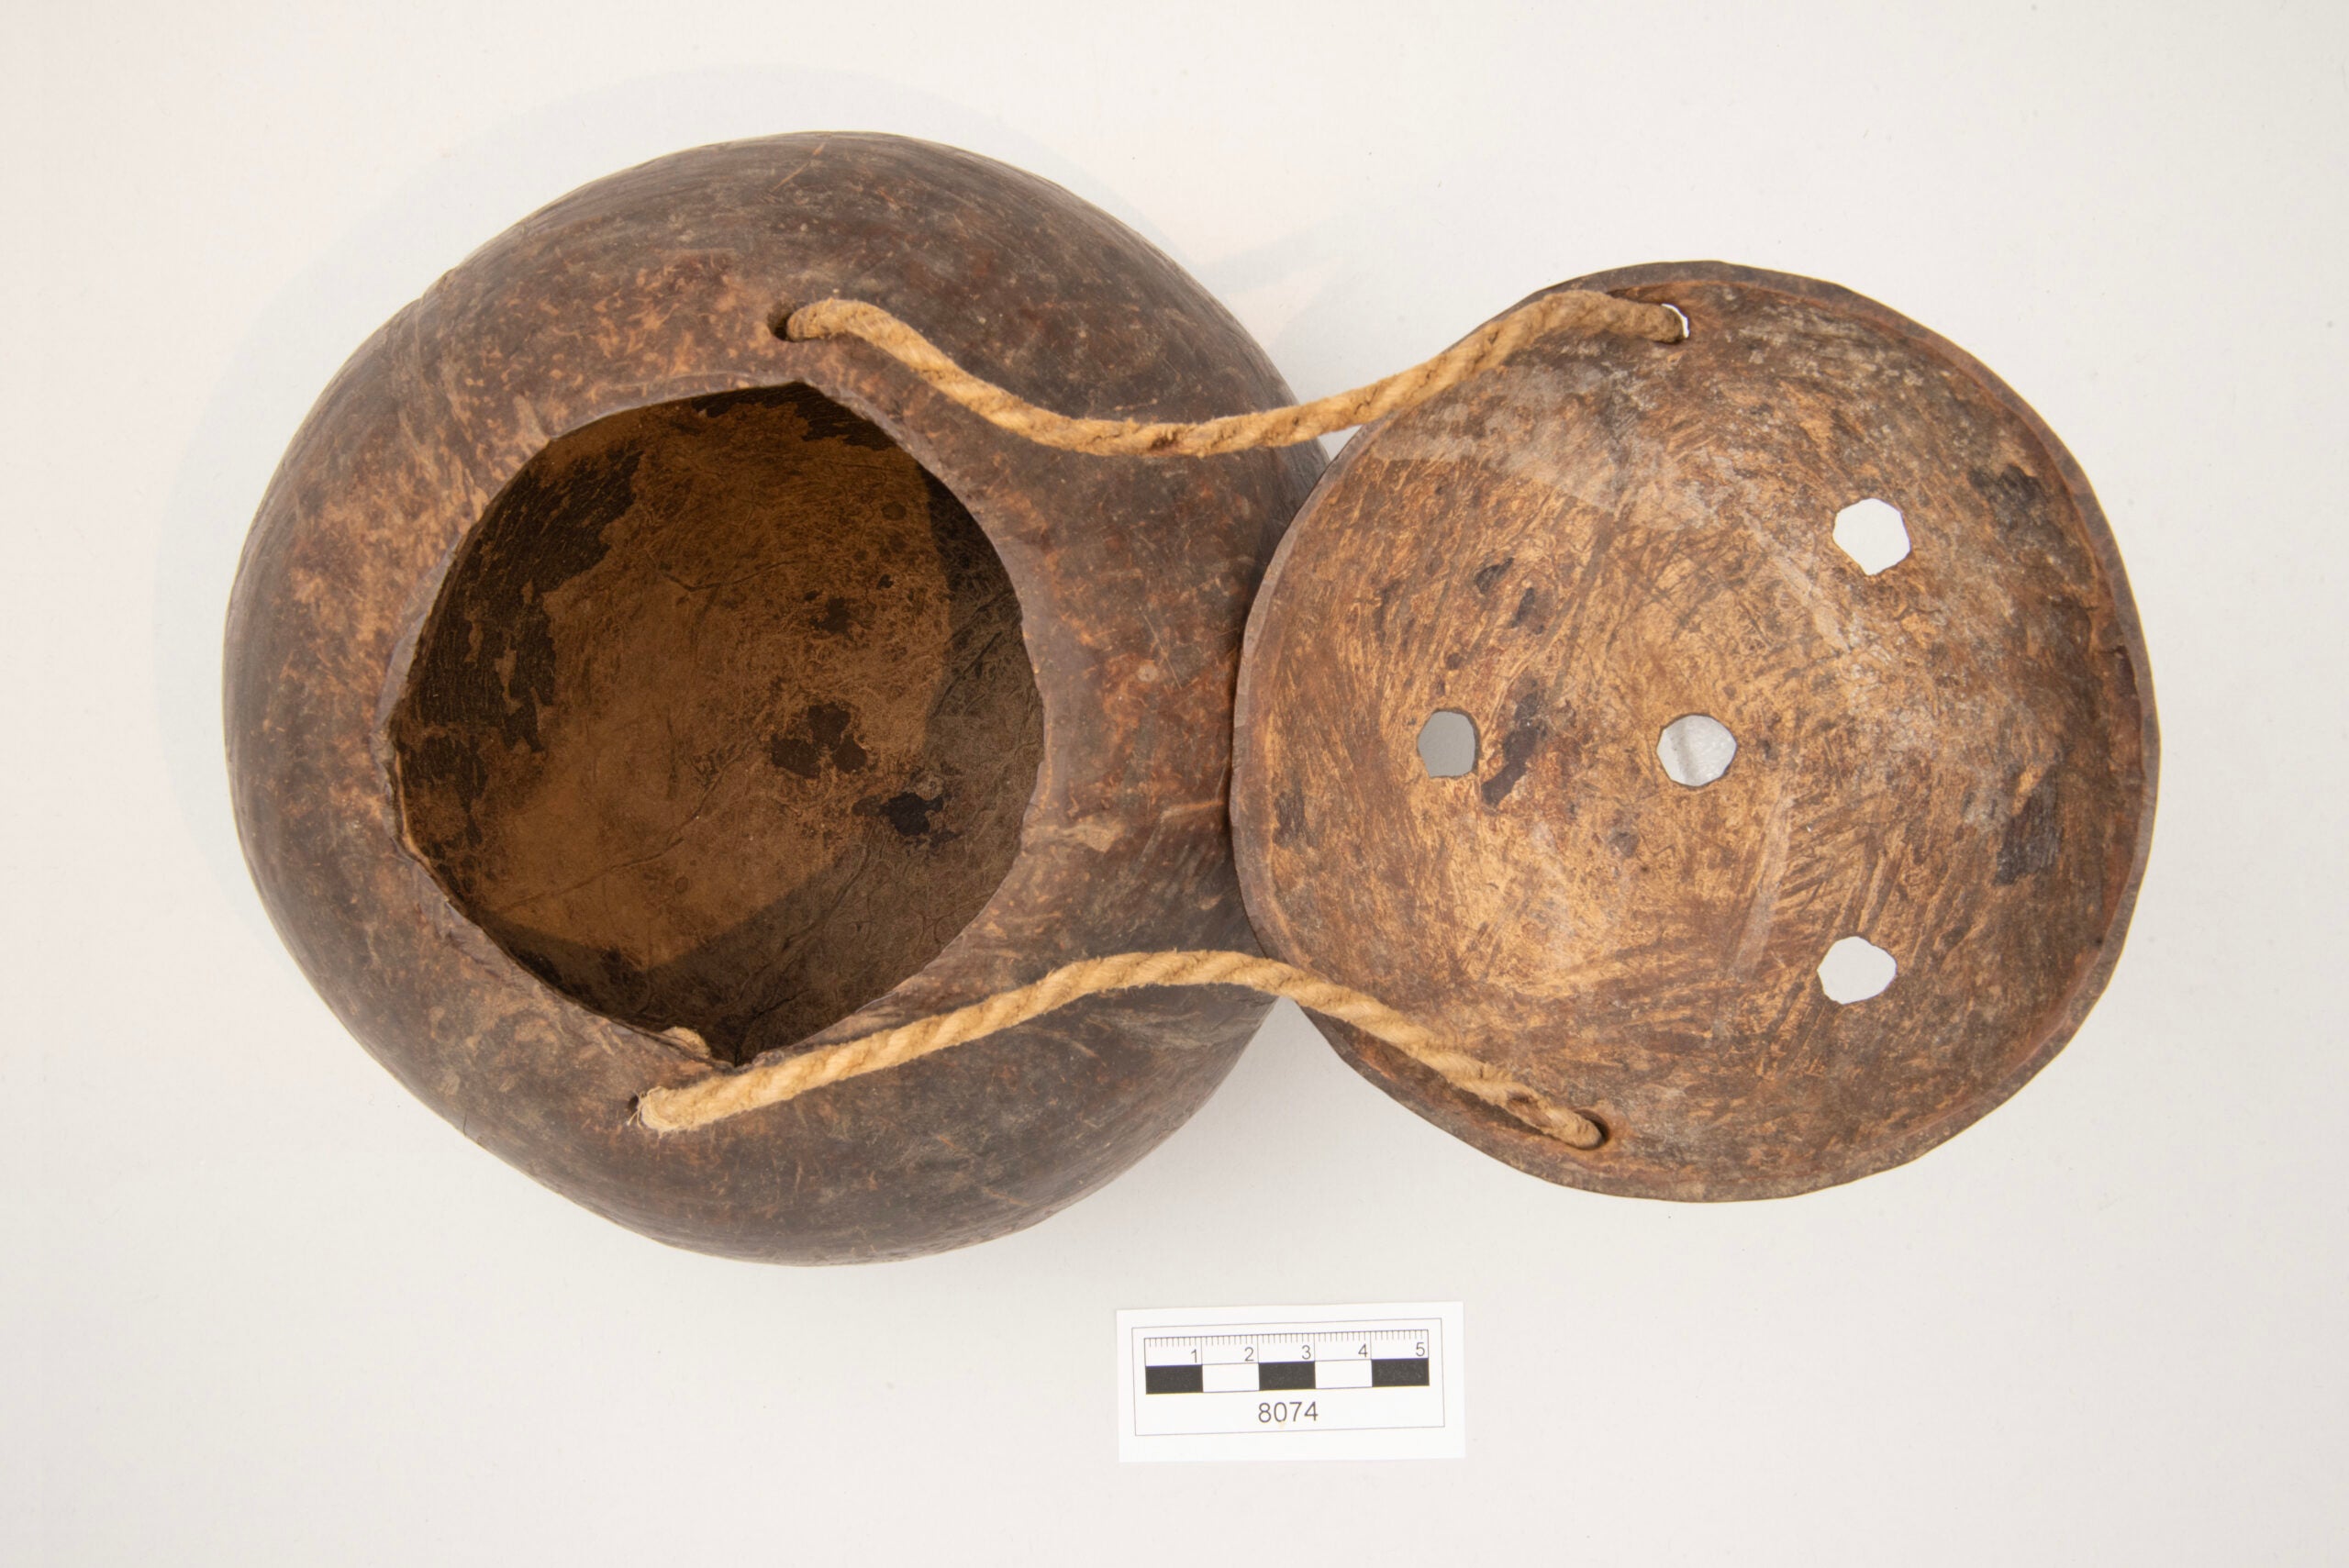 The coconut shell container with its lid open, showing the interior of the container and the lid. There are work marks visible on the inside of the lid and the shell.